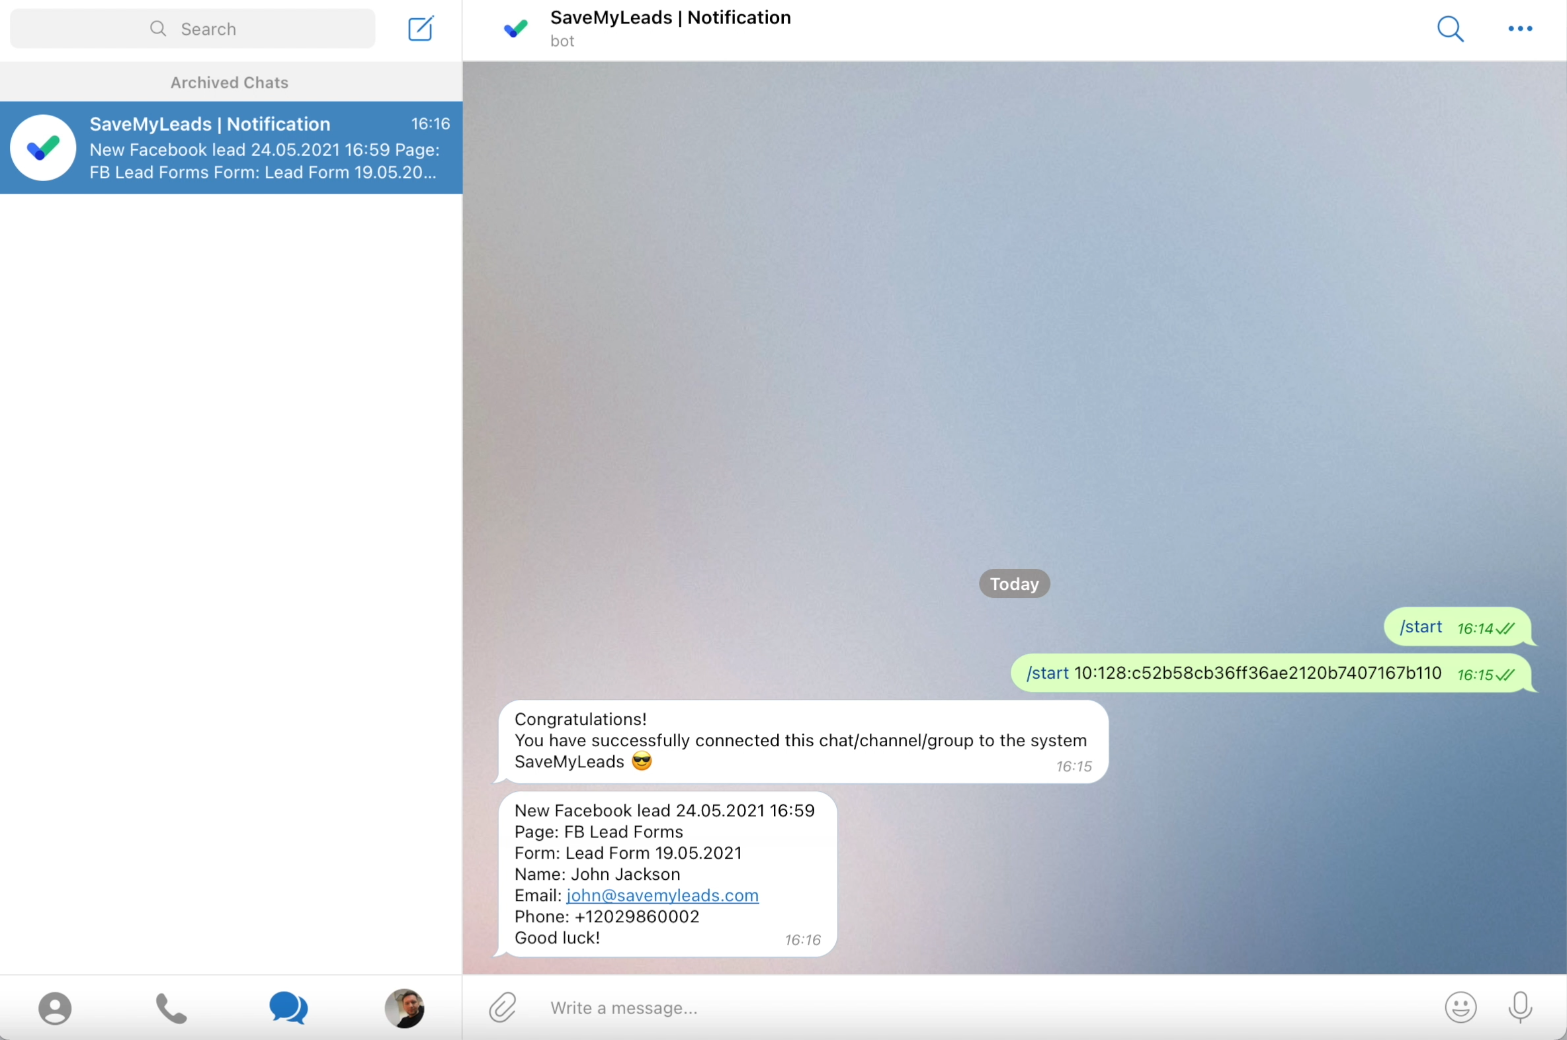 How to set up the upload of new leads from a Facebook advertising account in Telegram |&nbsp;&nbsp;Example message with lead details